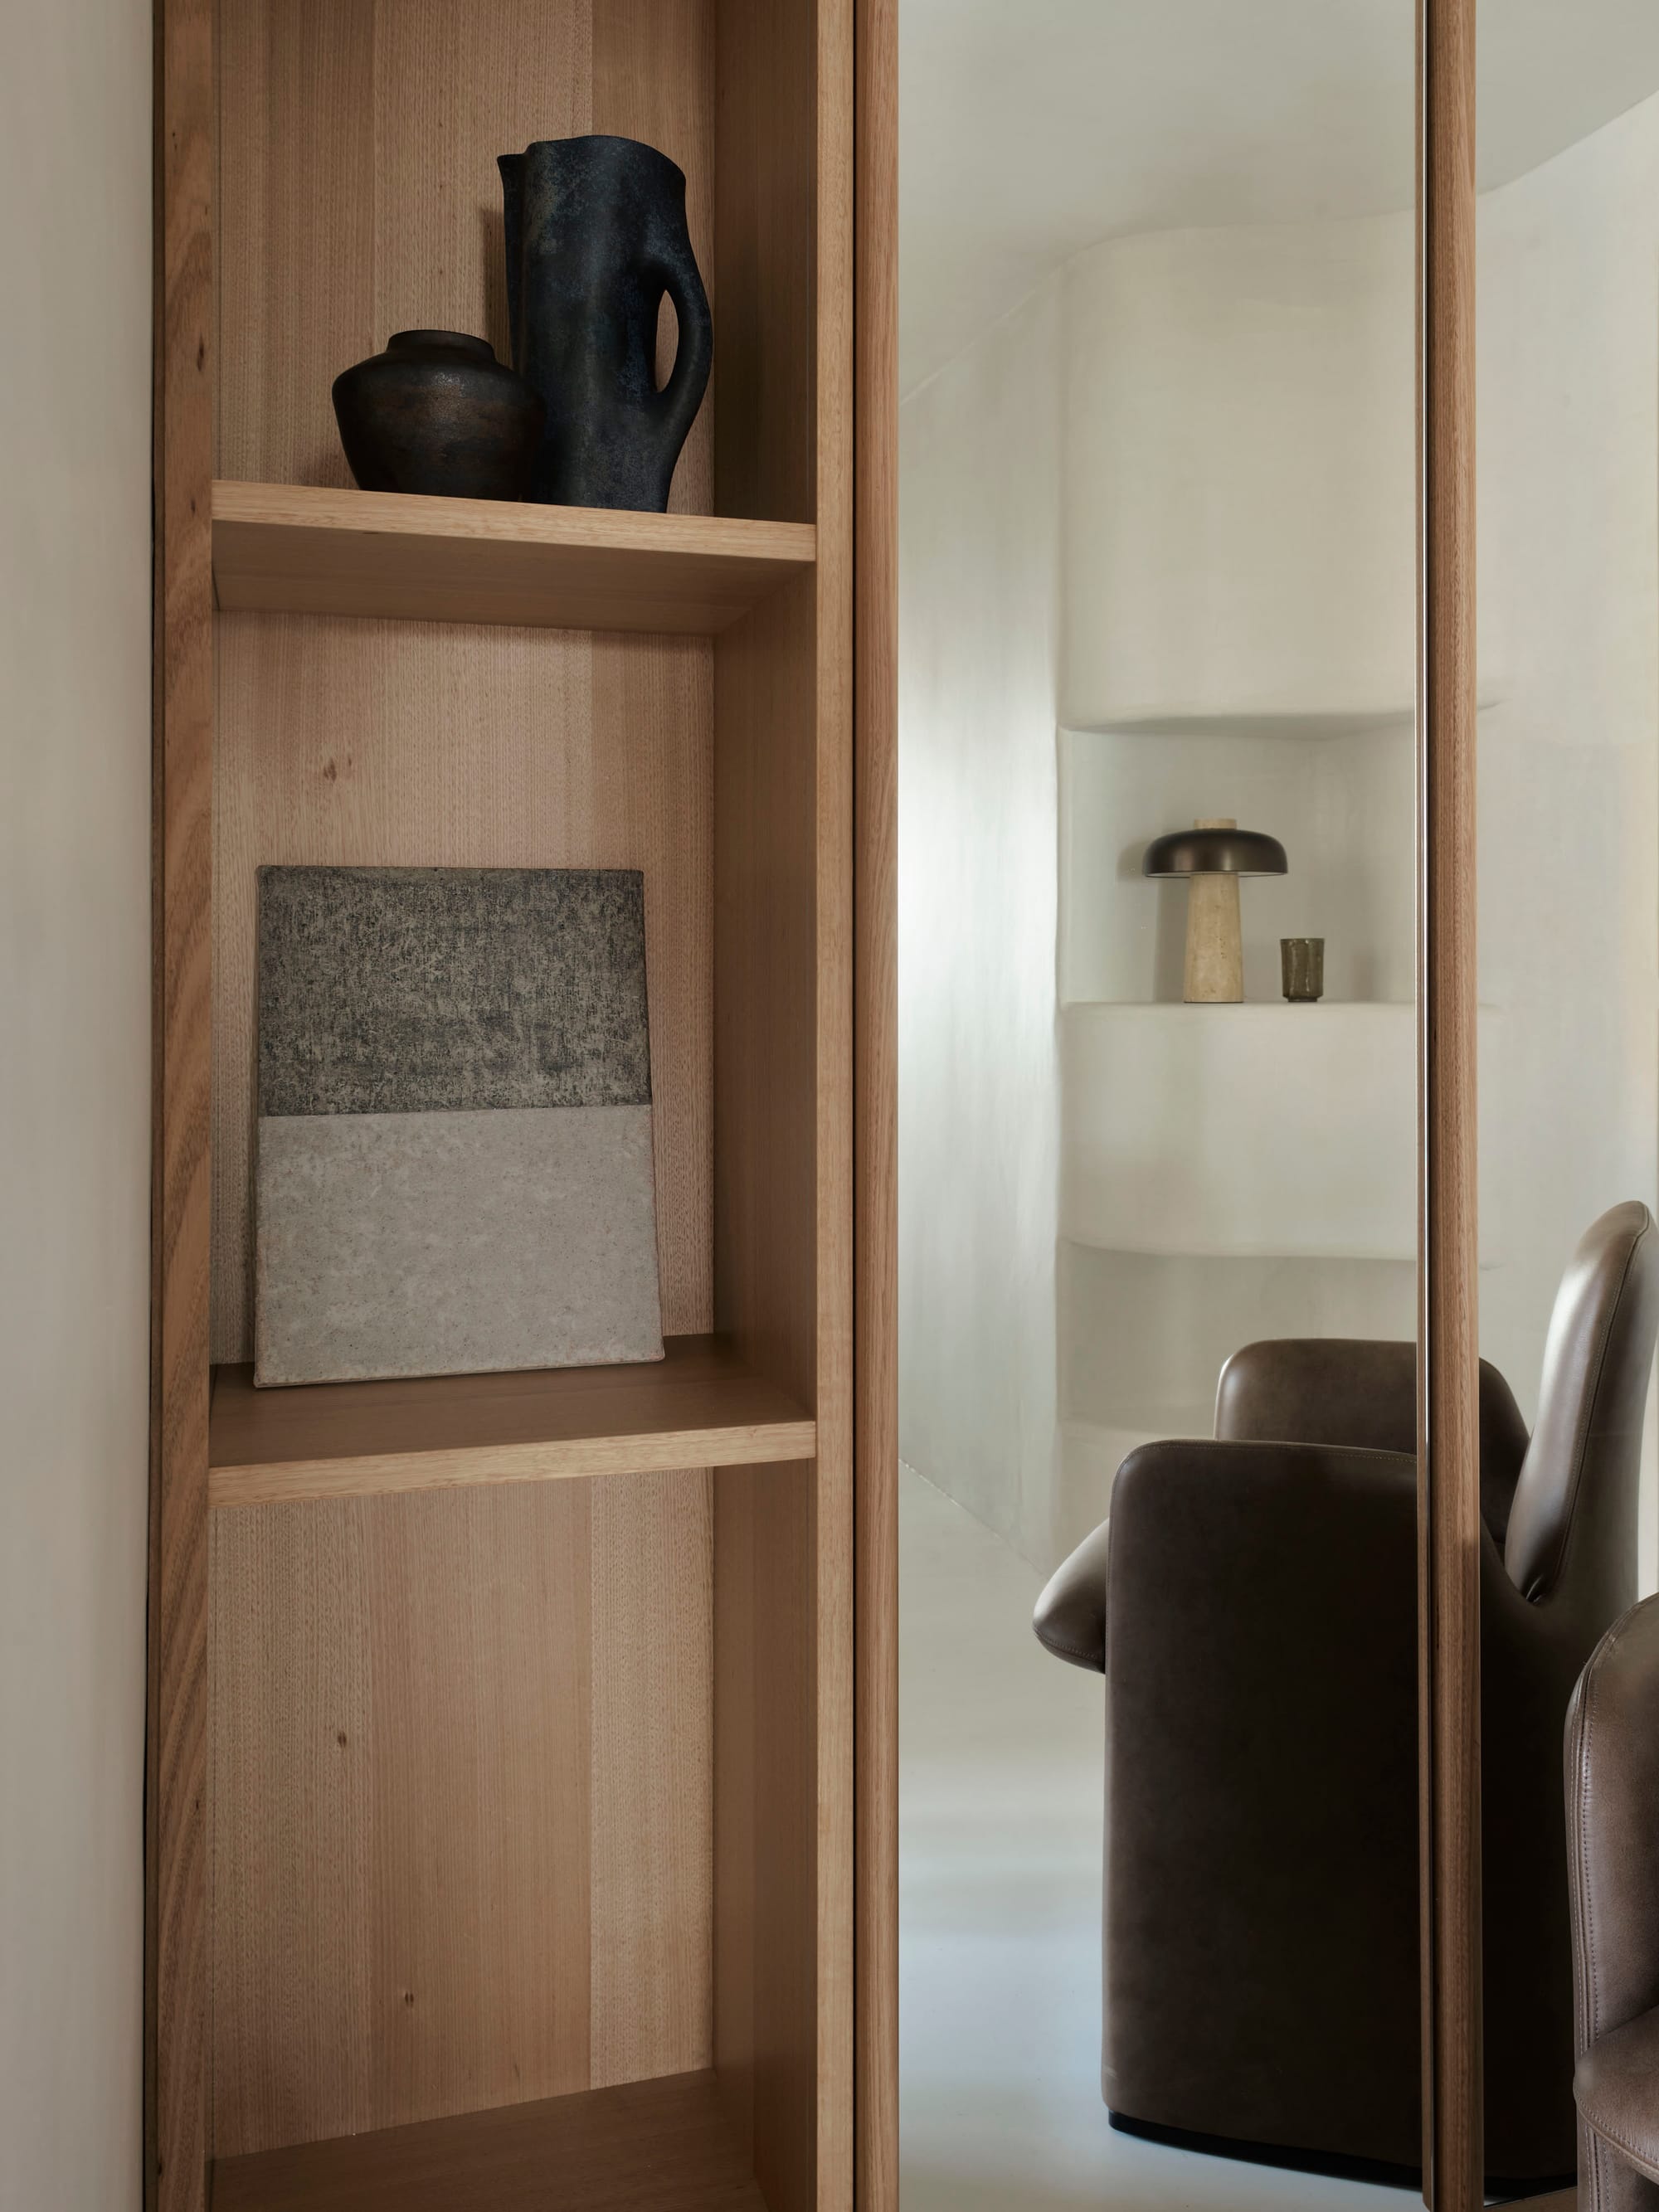 A detail shot of the Tasmanian timber veneer shelves and designer objects scattered throughout the apartment